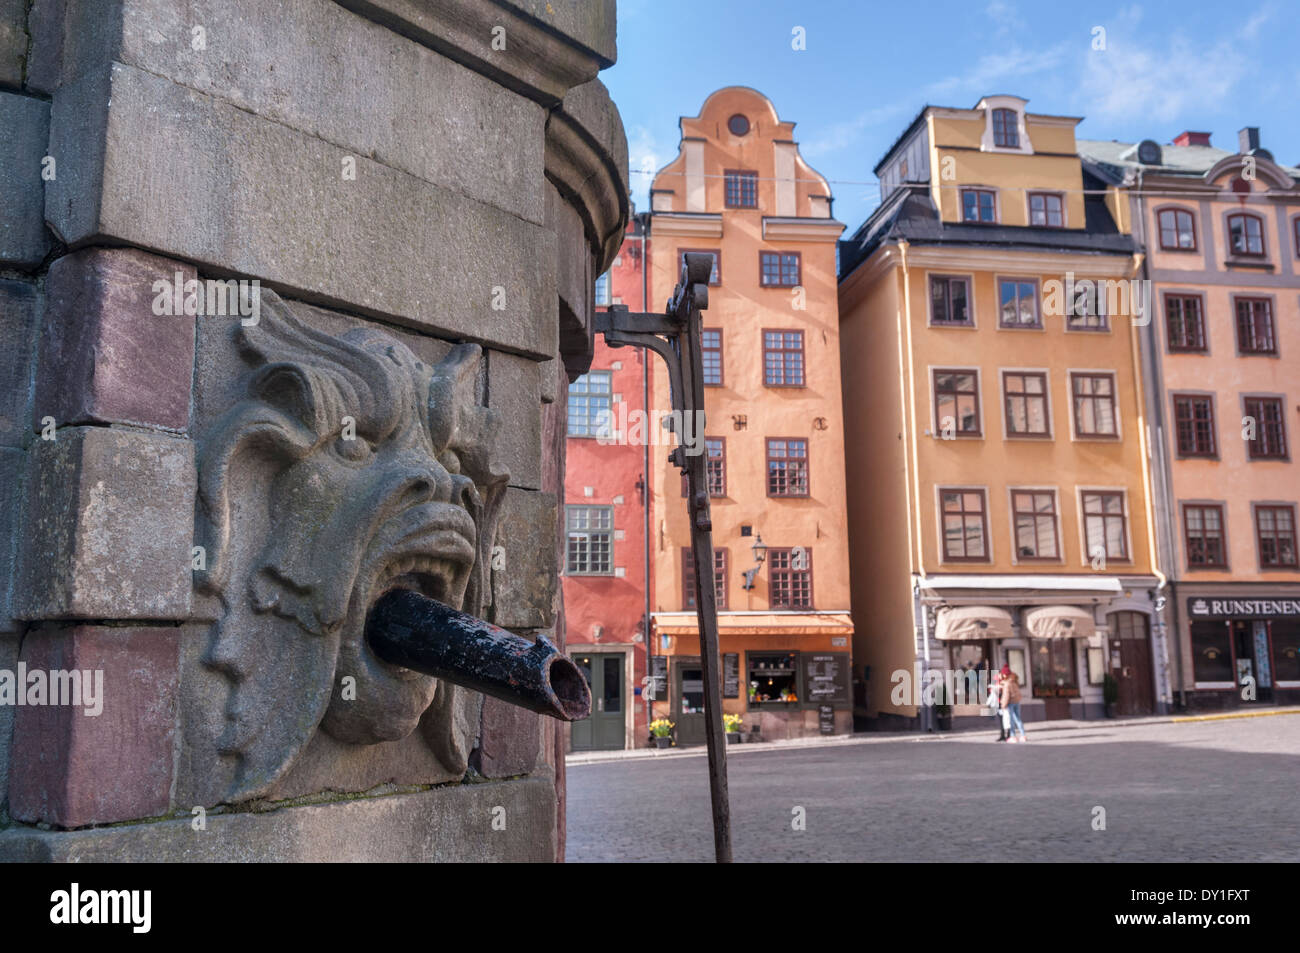 Old well Stortorget square Gamla Stan Stockholm Sweden Stock Photo